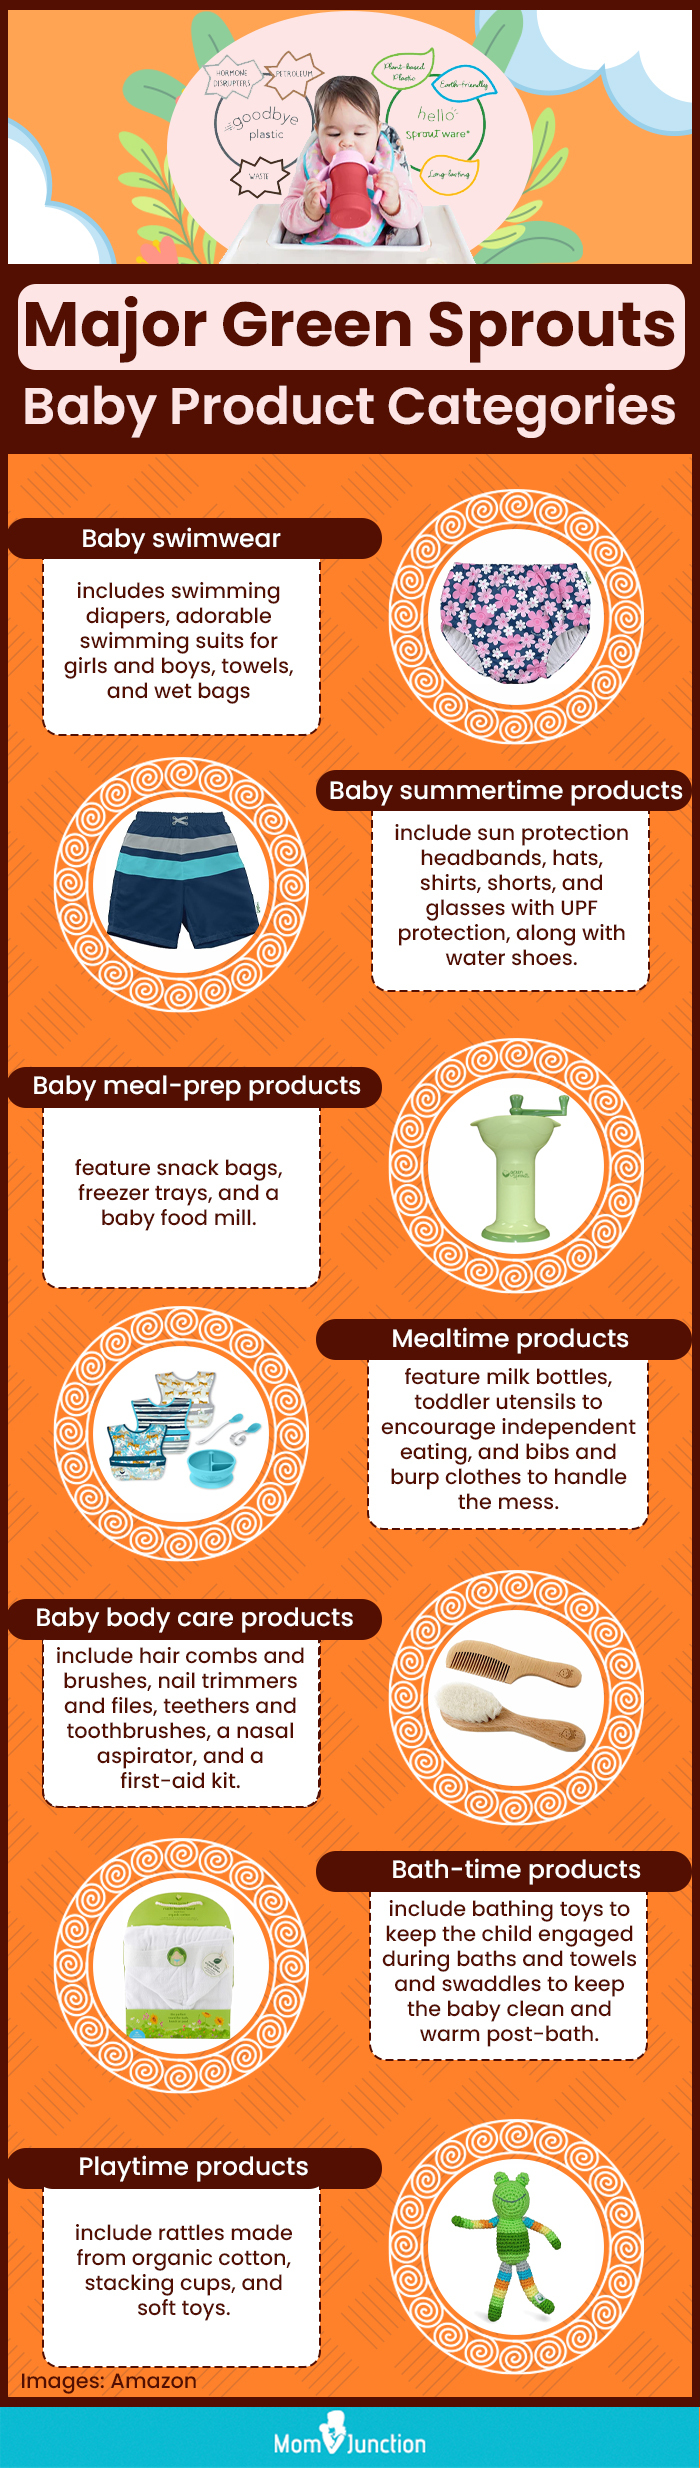 Major Green Sprouts Baby Product Categories (infographic)